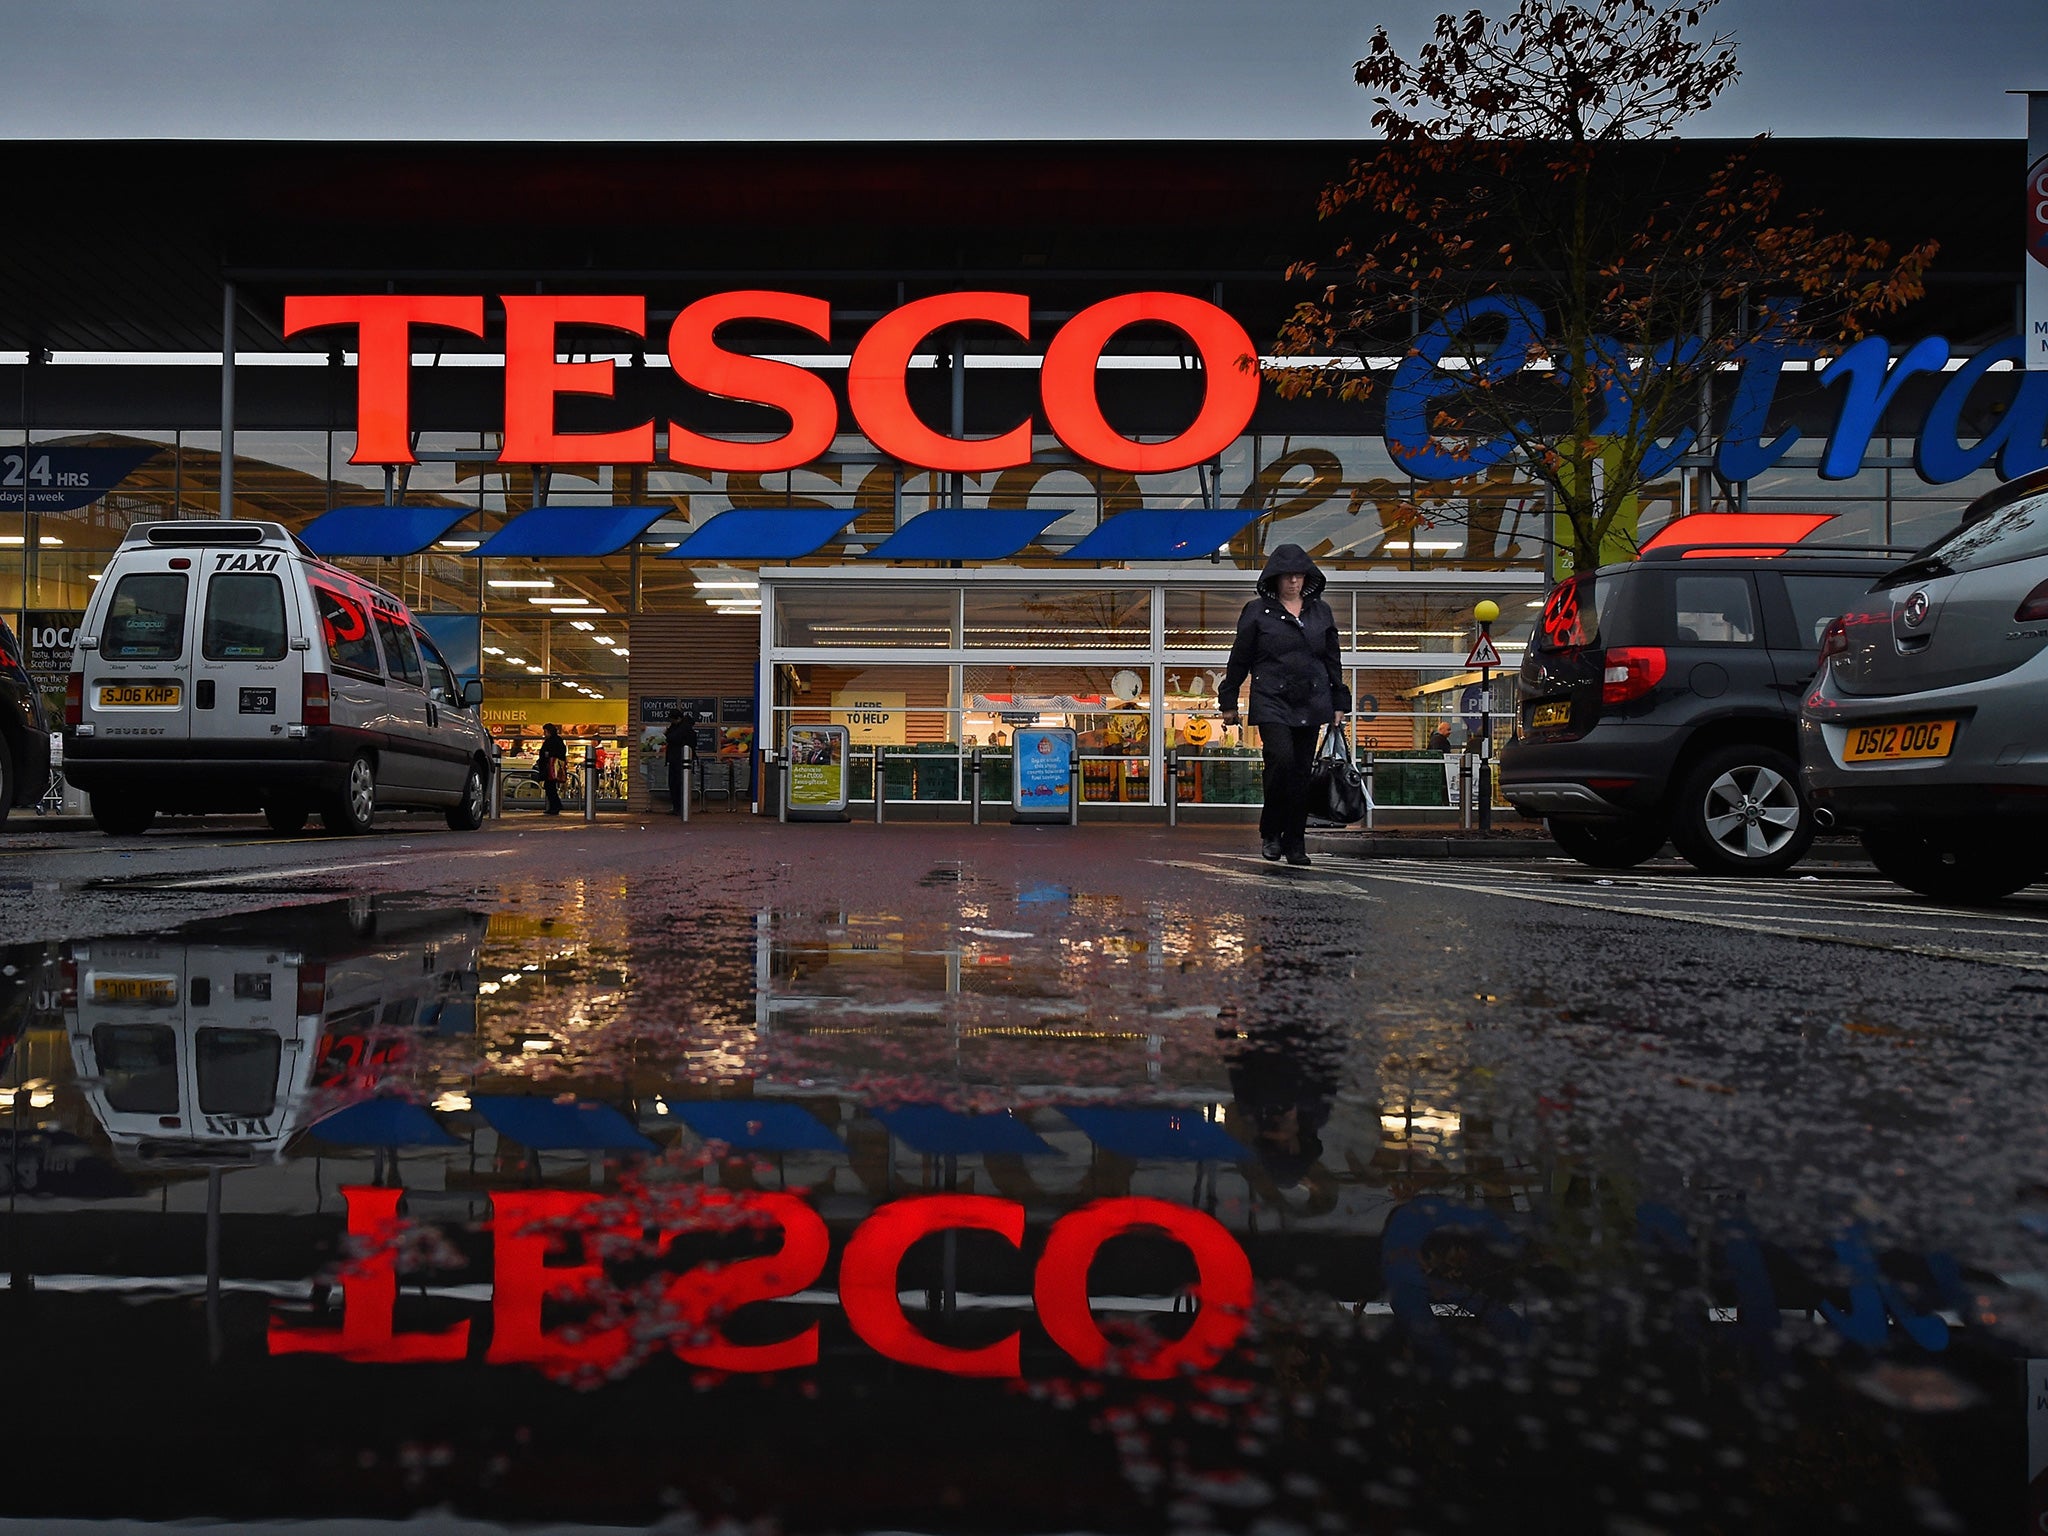 Tesco has been audited by PwC since 1983